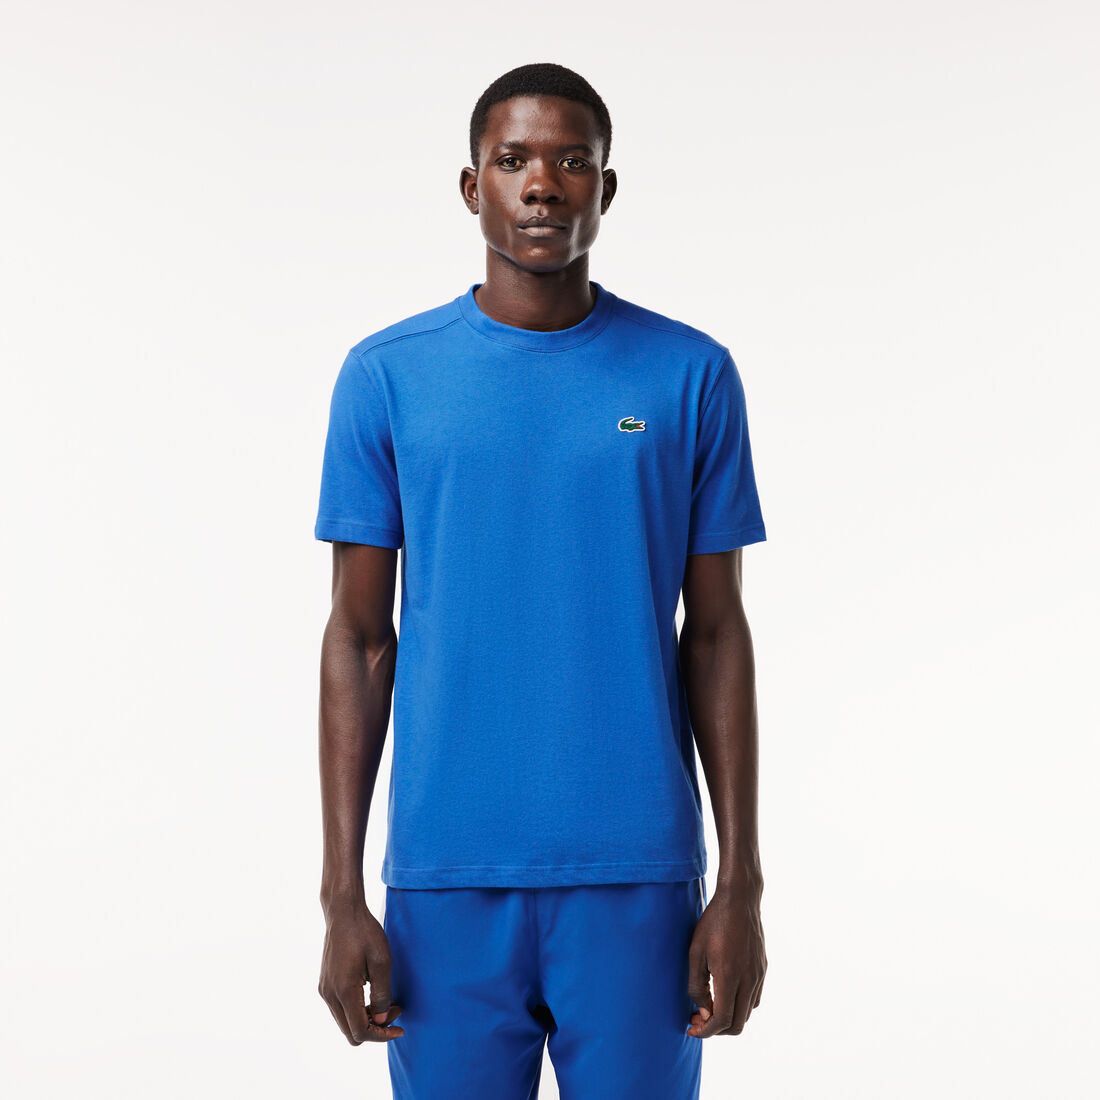 Men's Lacoste SPORT Breathable T-shirt - TH7618-00-IXW